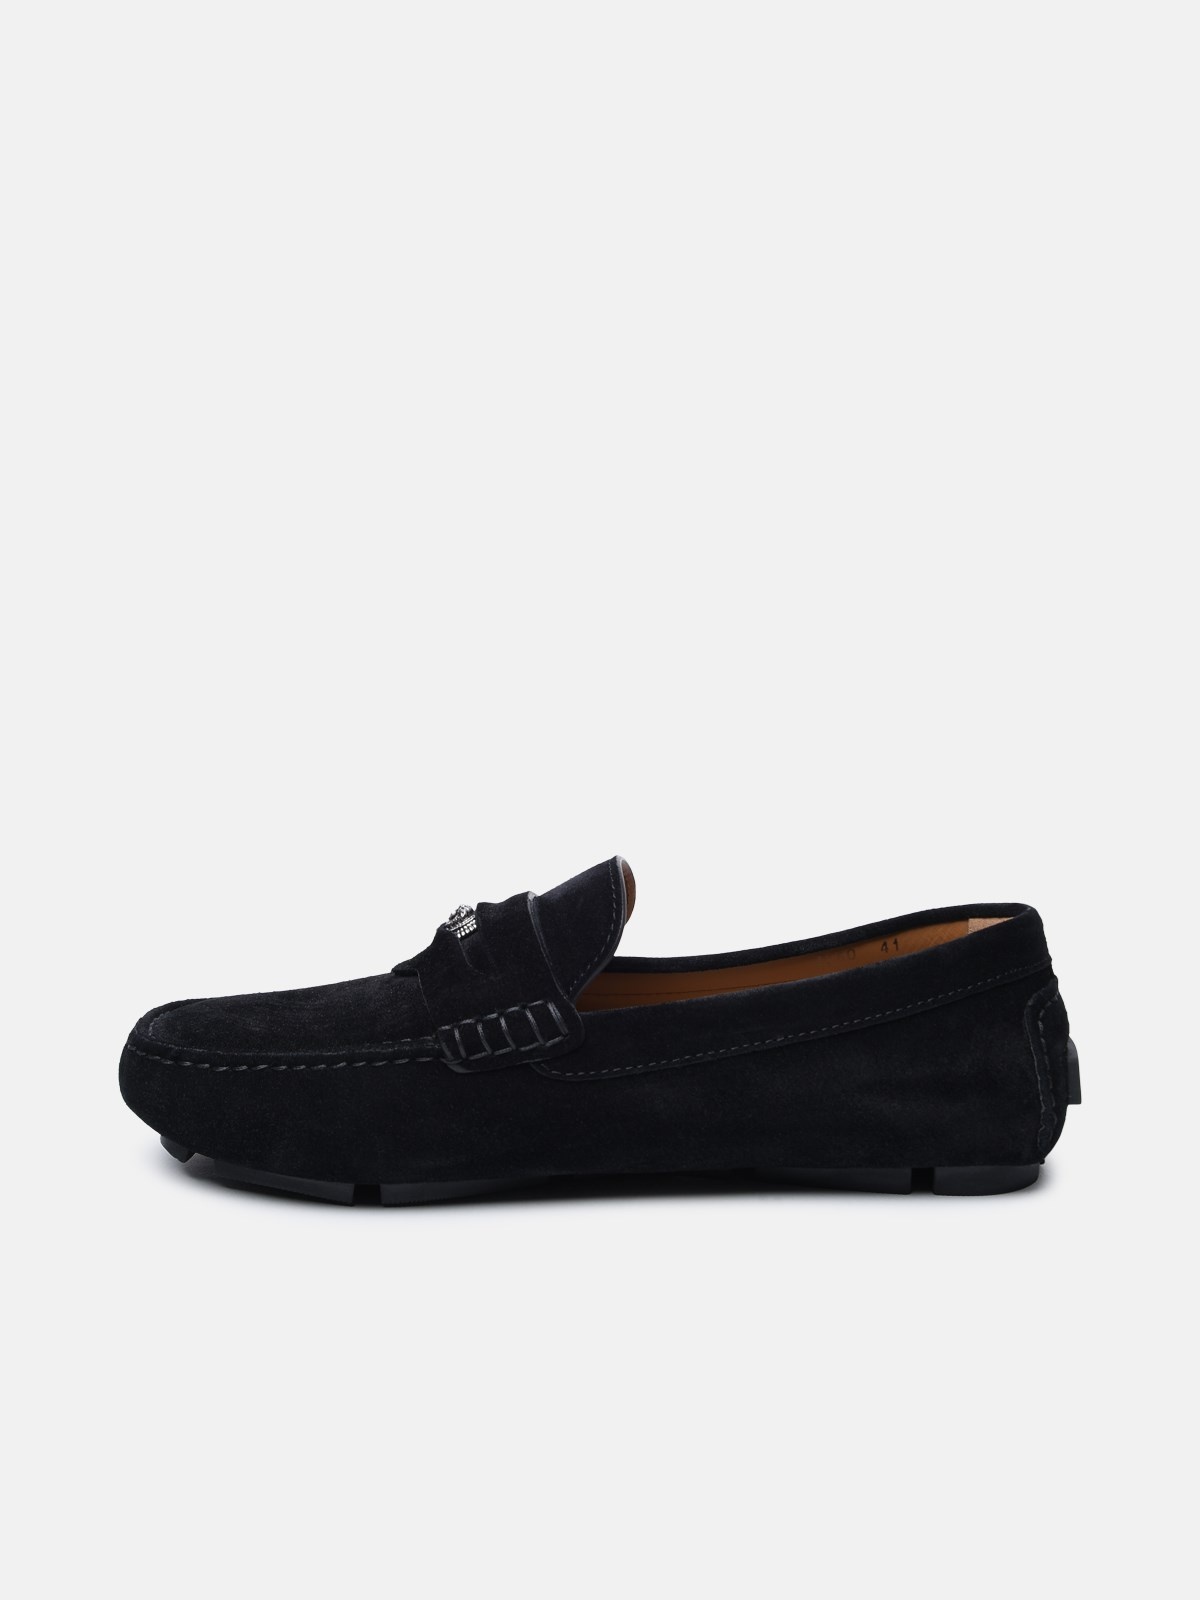 BLACK SUEDE LOAFERS - 3